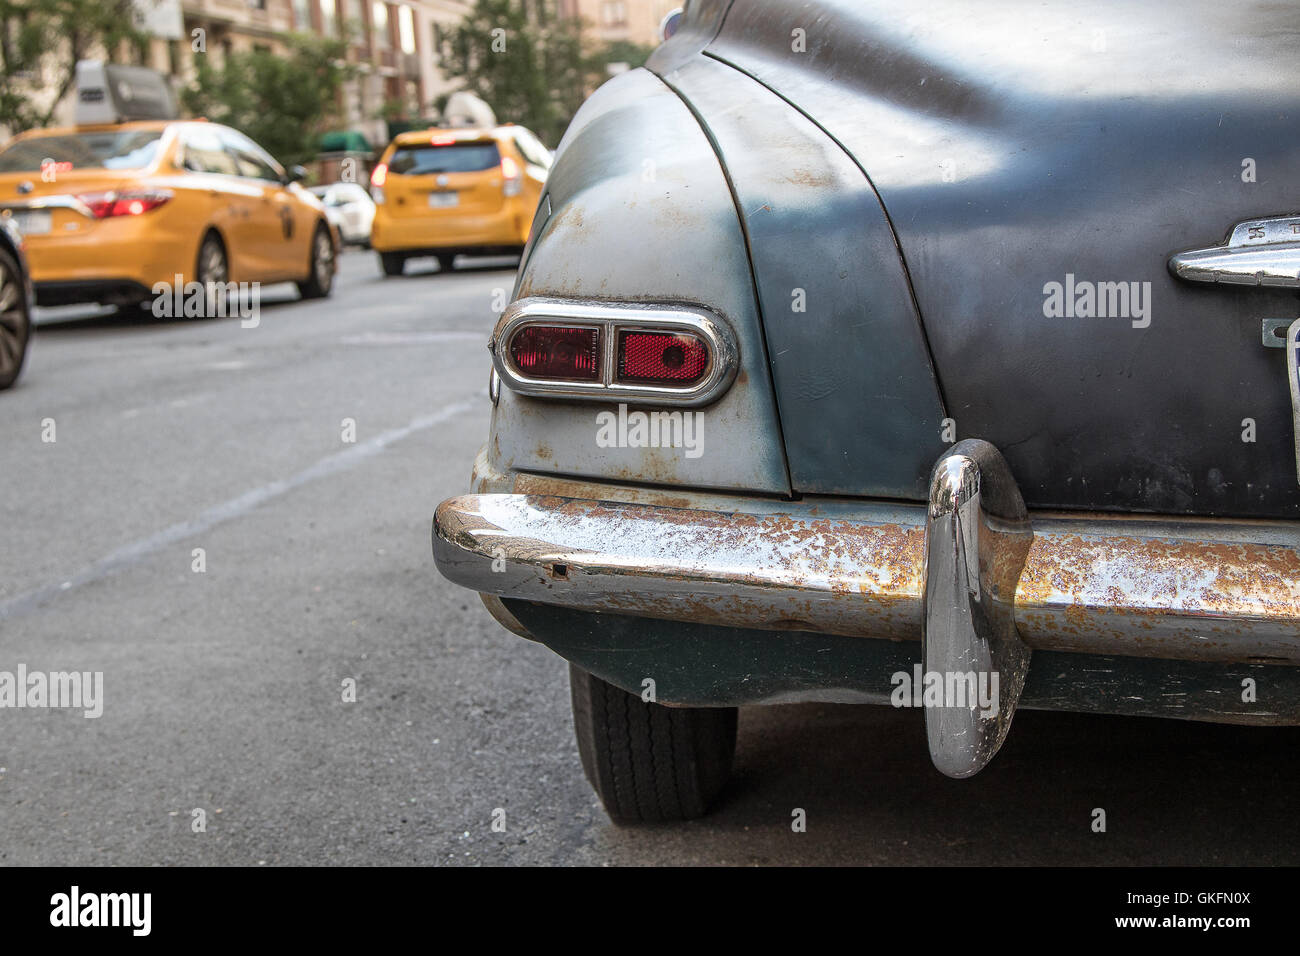 Rear view of an old vintage car in need of restoration. Stock Photo